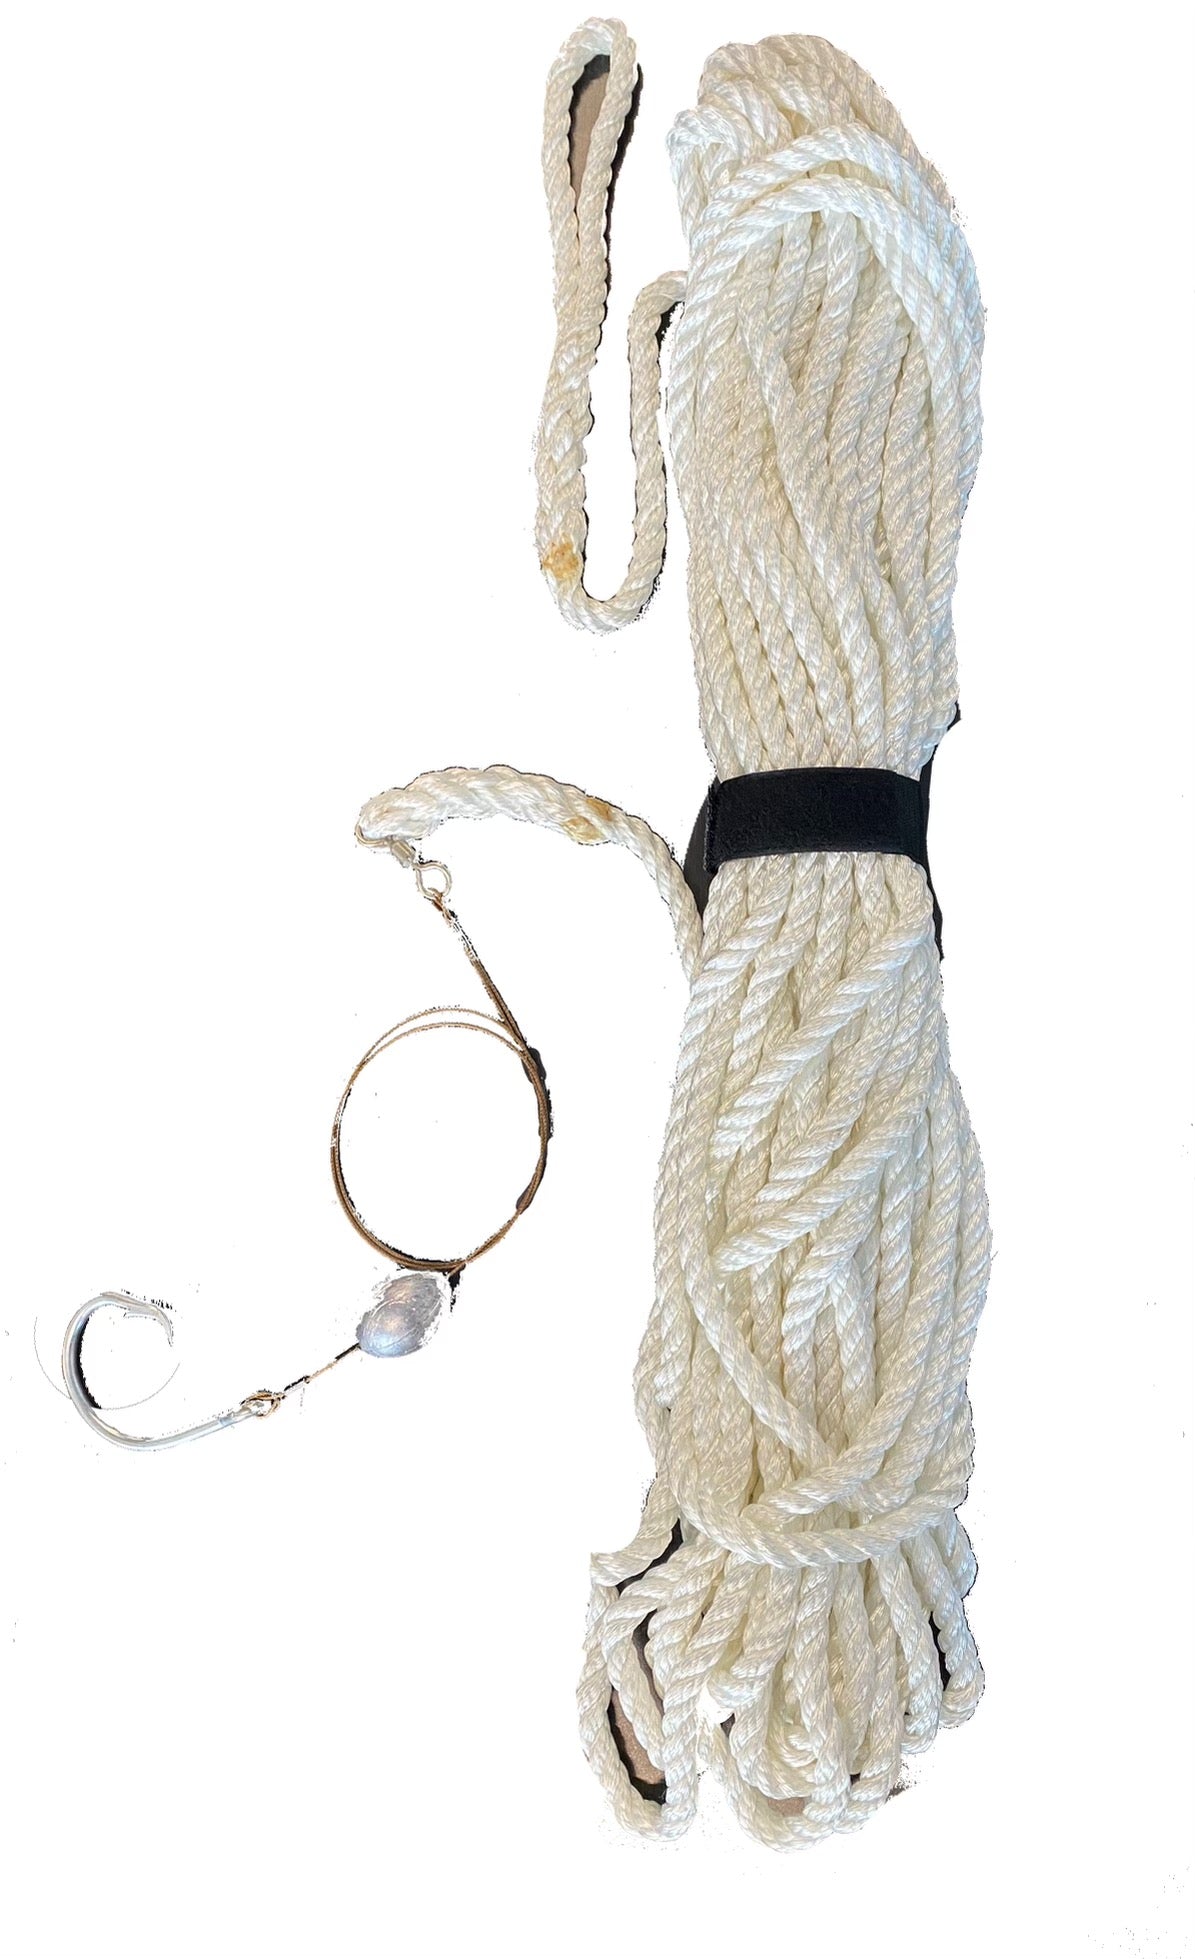 Goliath Grouper Hand Line Rig - Dogfish Tackle & Marine